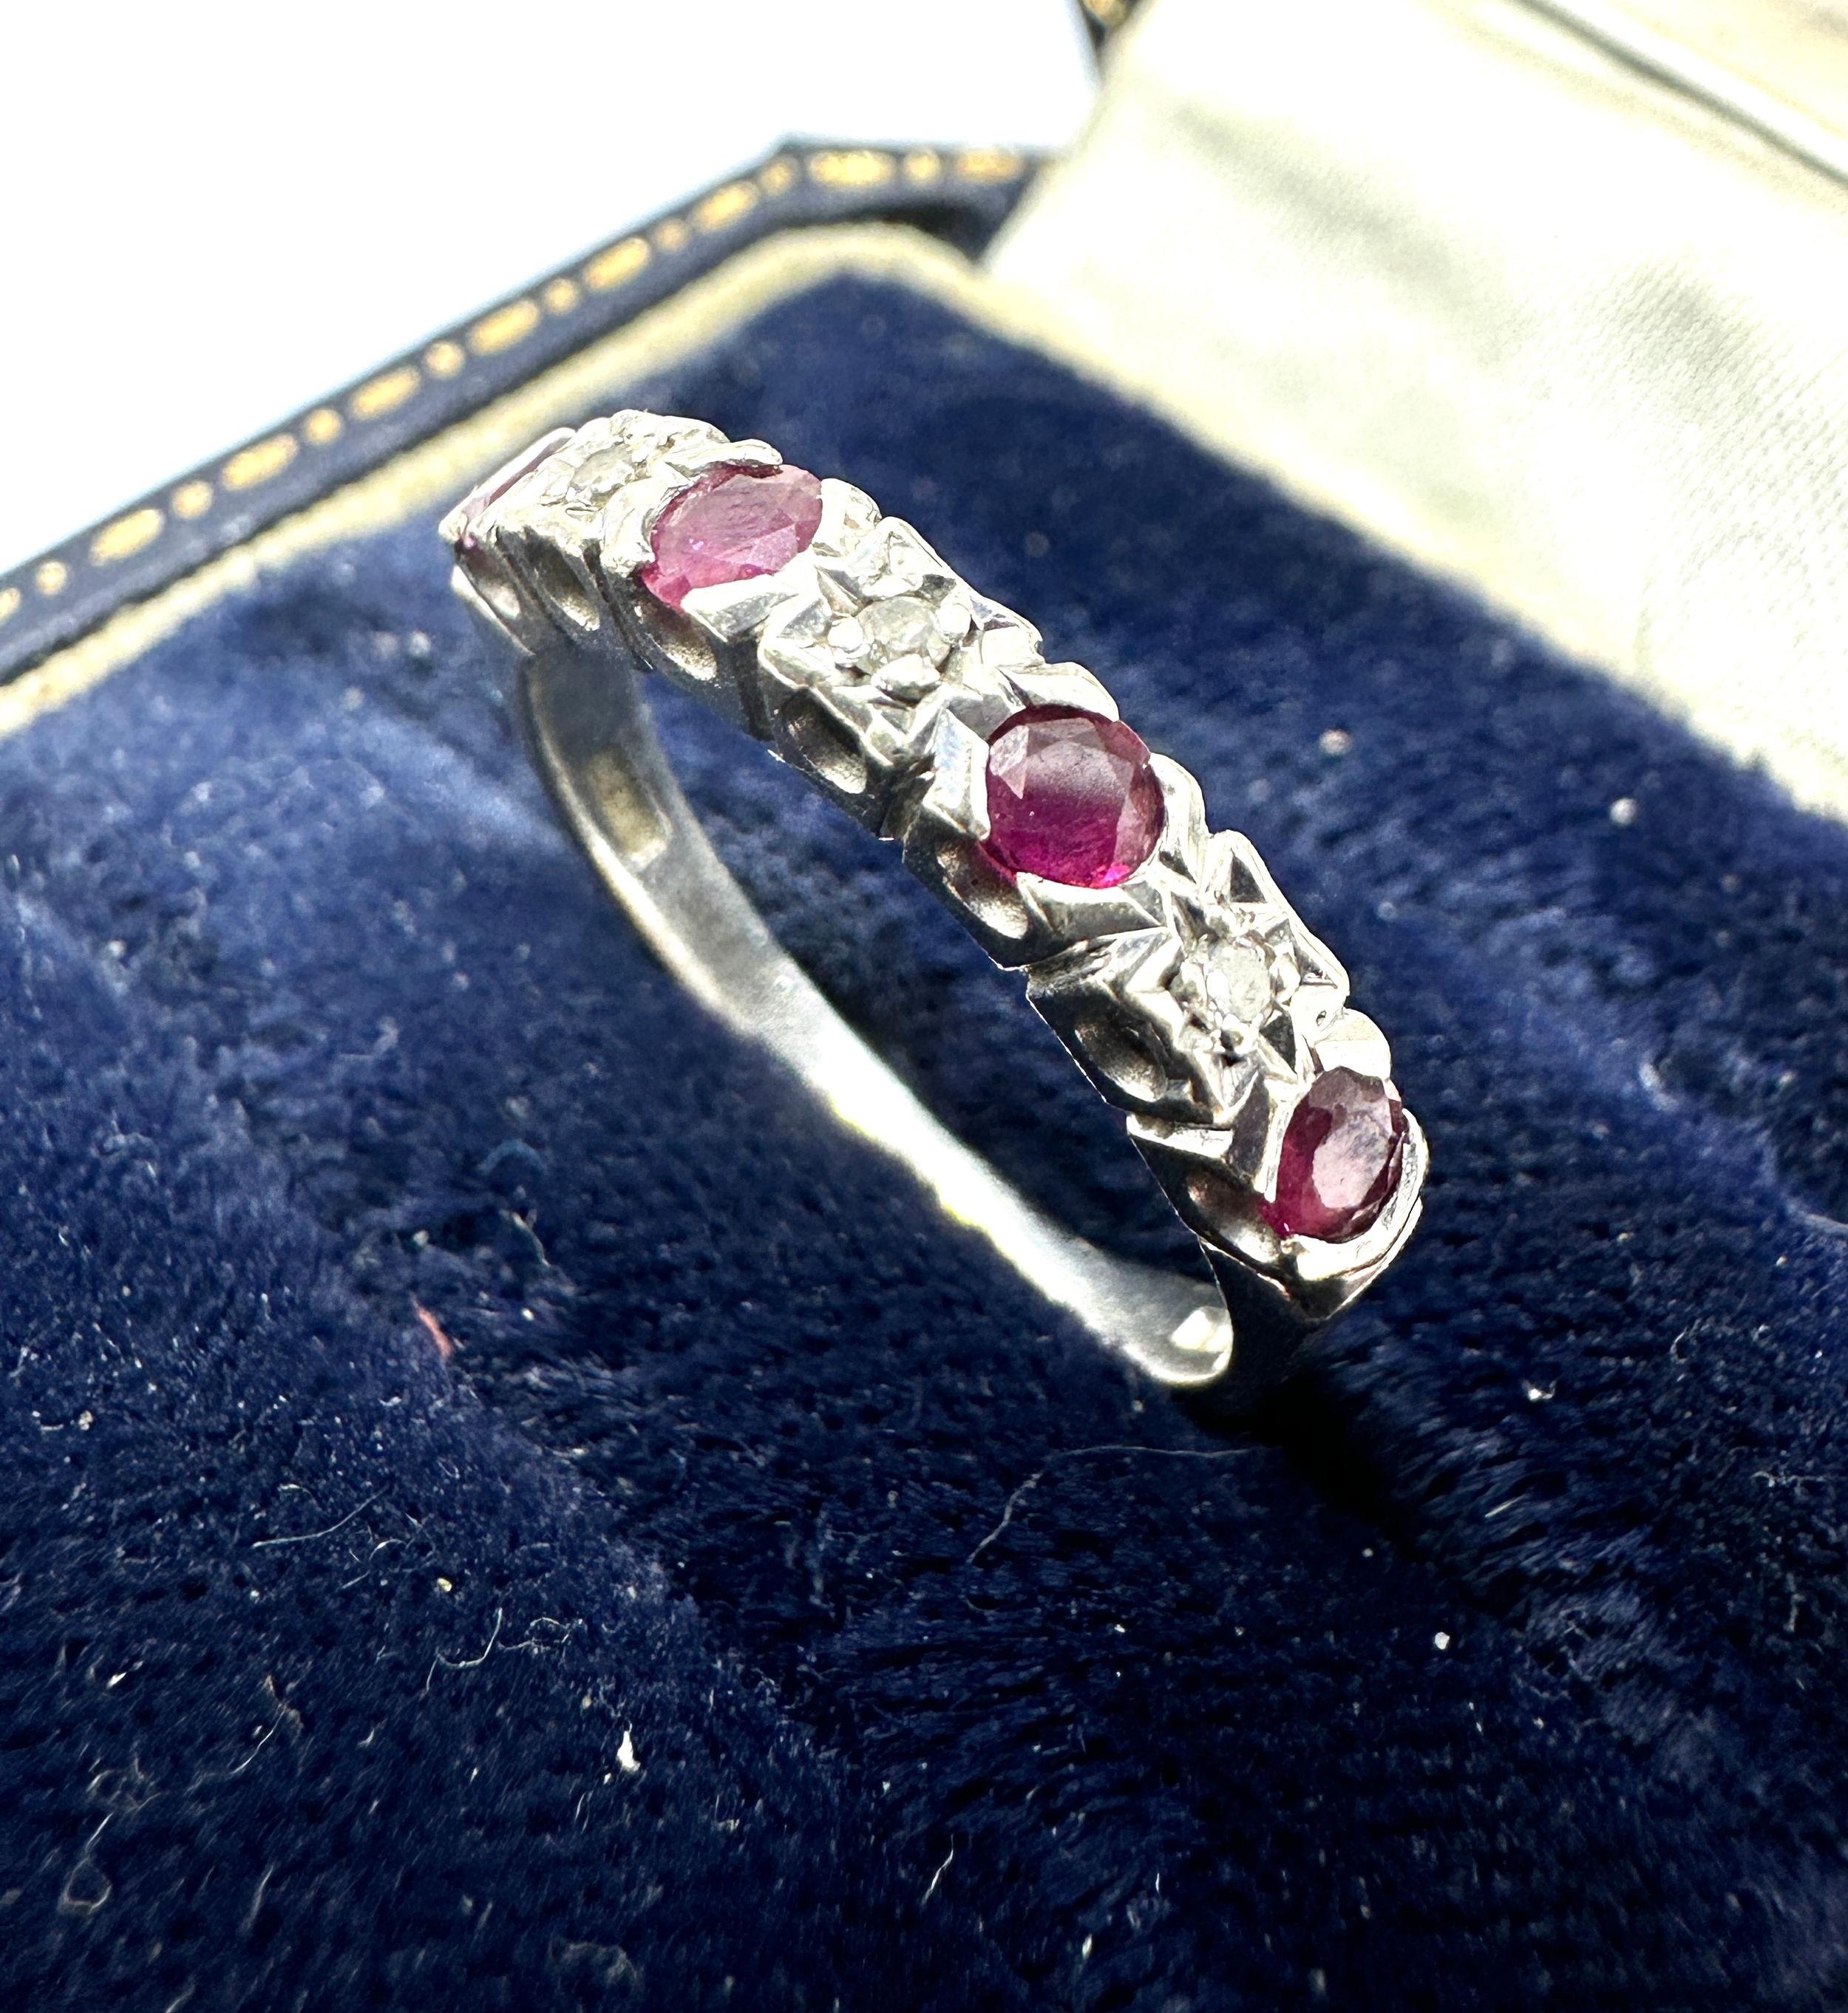 9ct white gold diamond & ruby ring weight 2.5g - Image 3 of 4